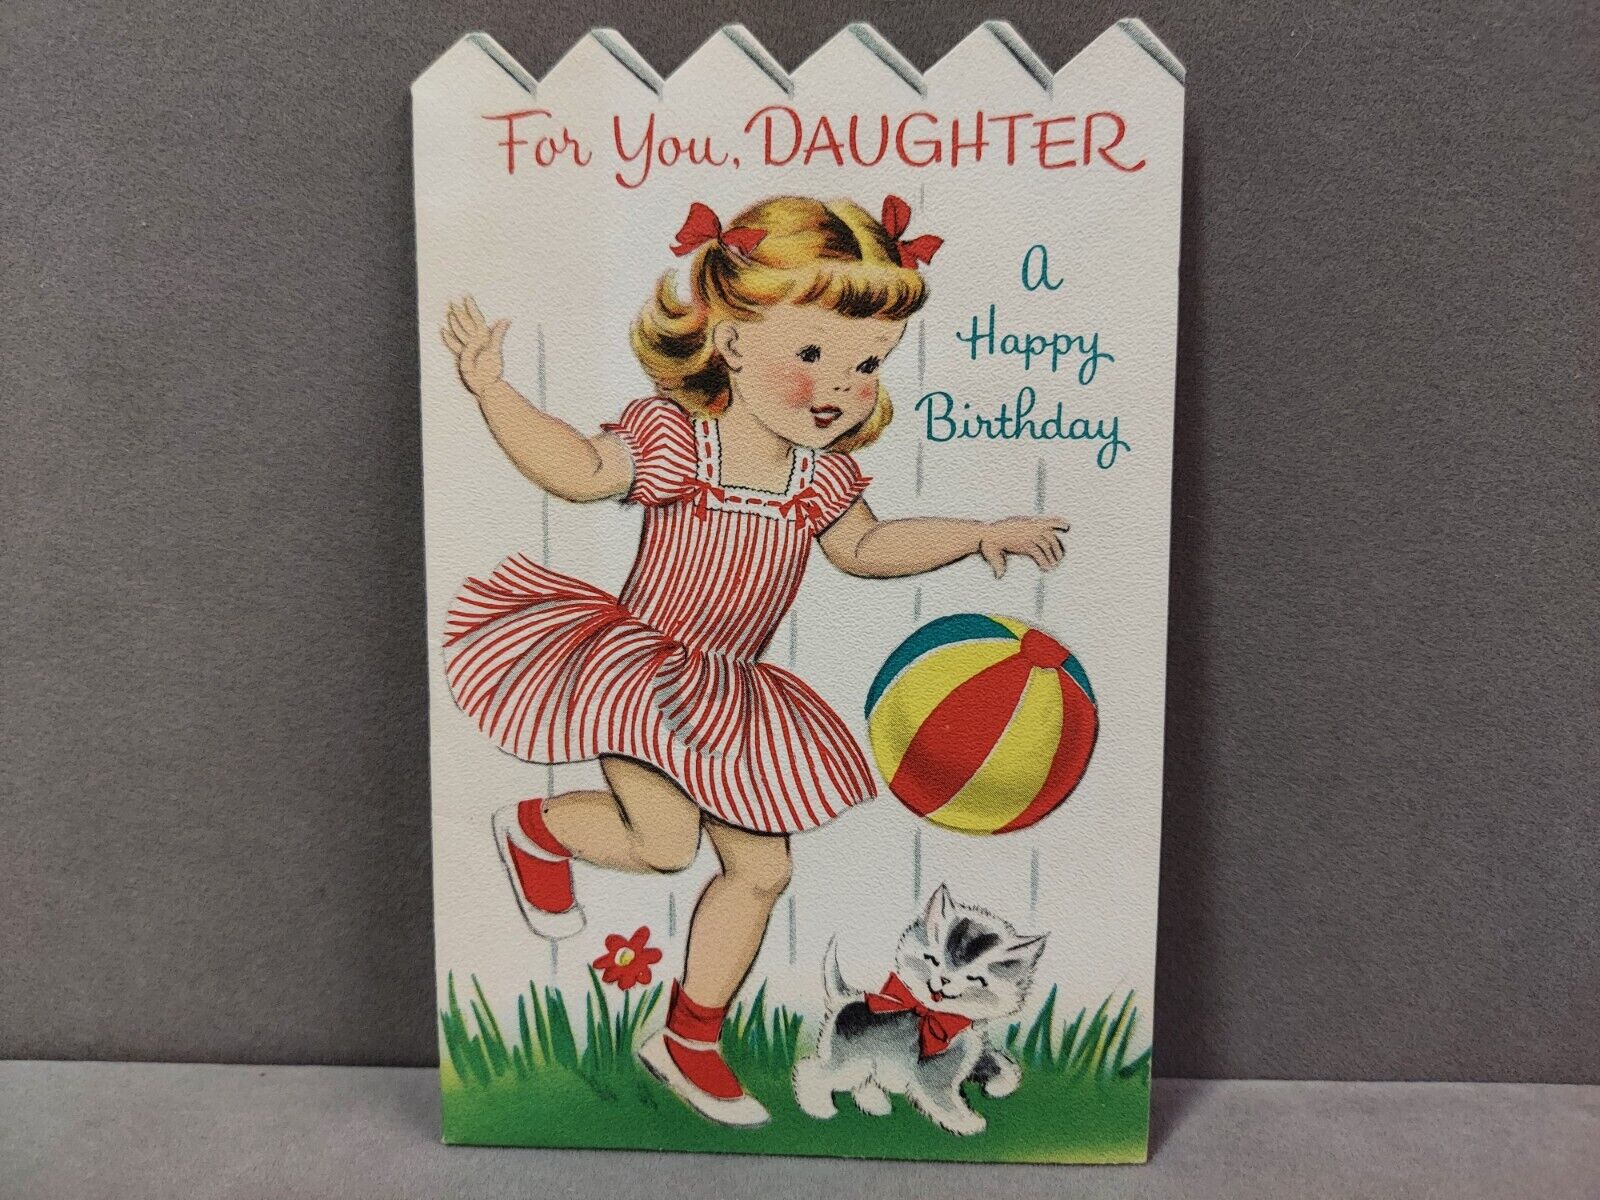 Vintage Die Cut Birthday Card 1950s Girl Kicking A Ball Used Norcross Card